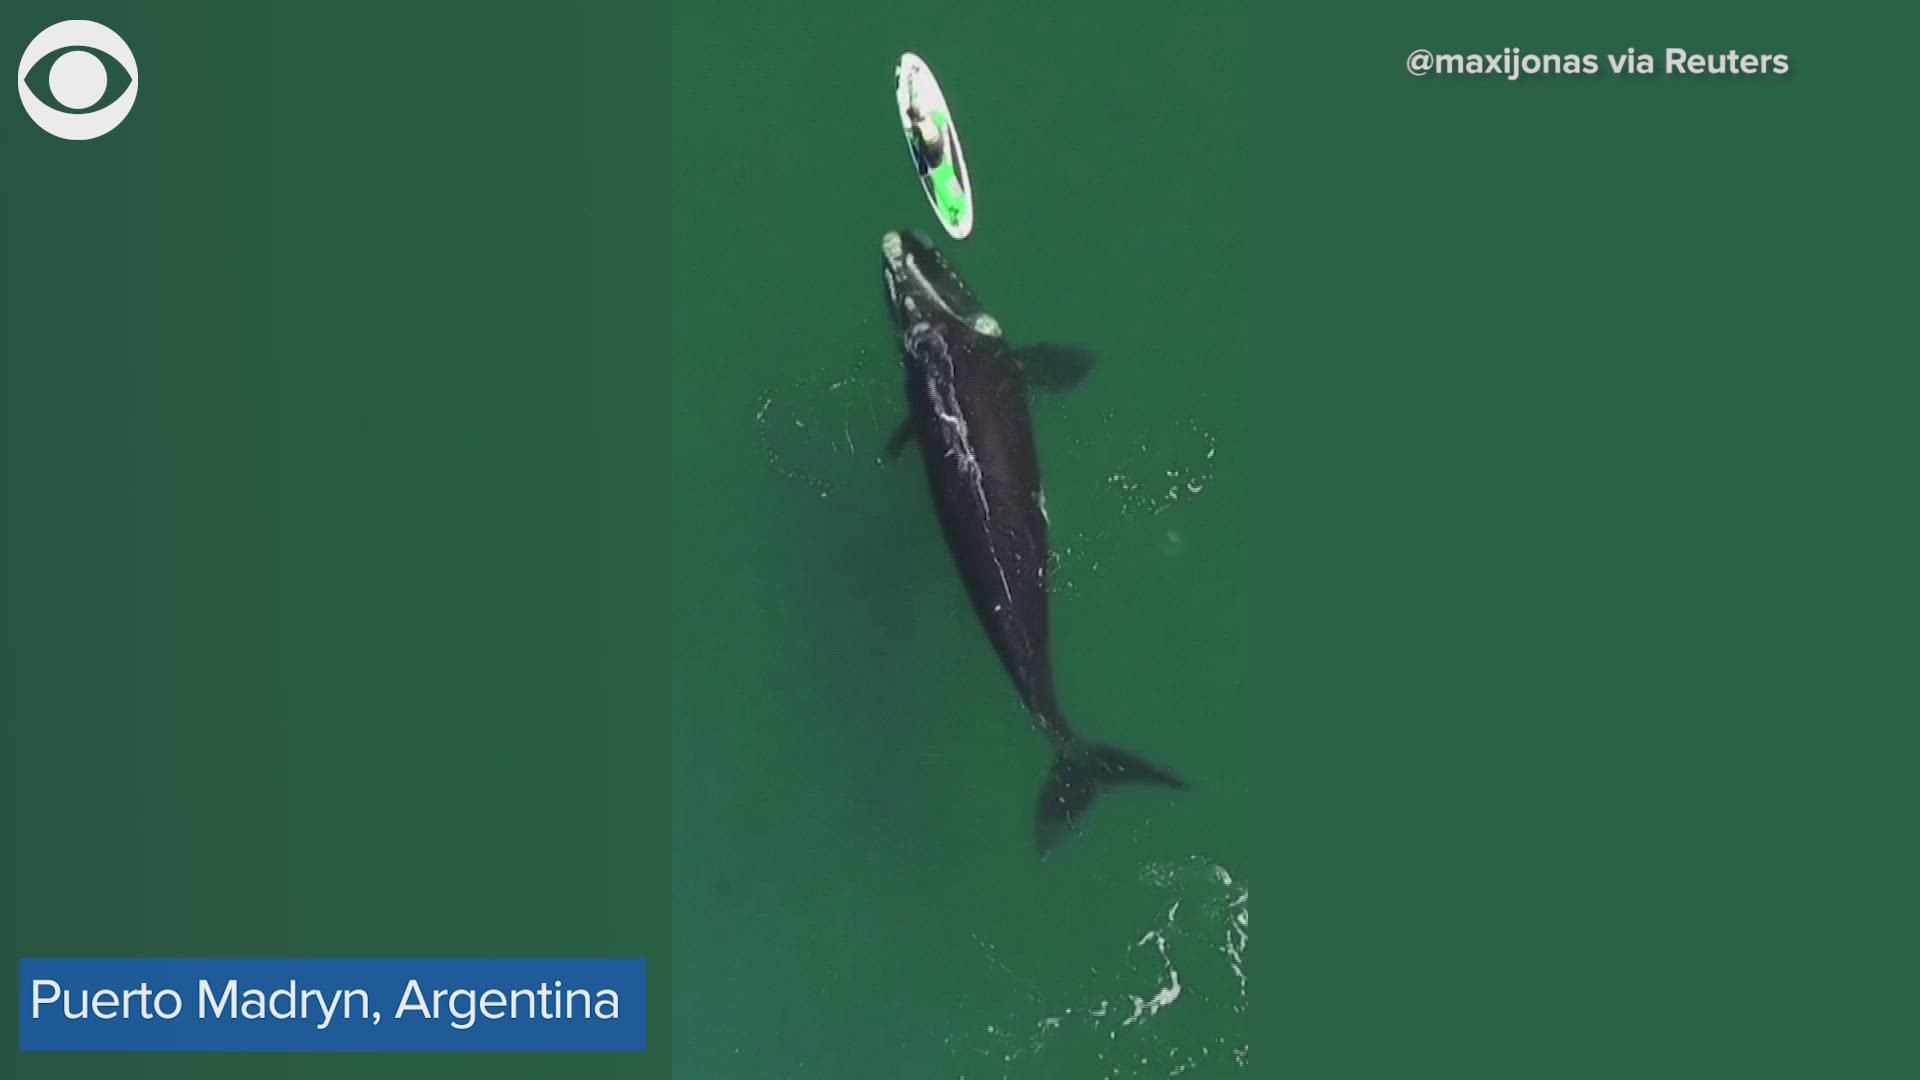 WOW! Here’s the moment a whale paid a visit to a paddleboarder in Argentina